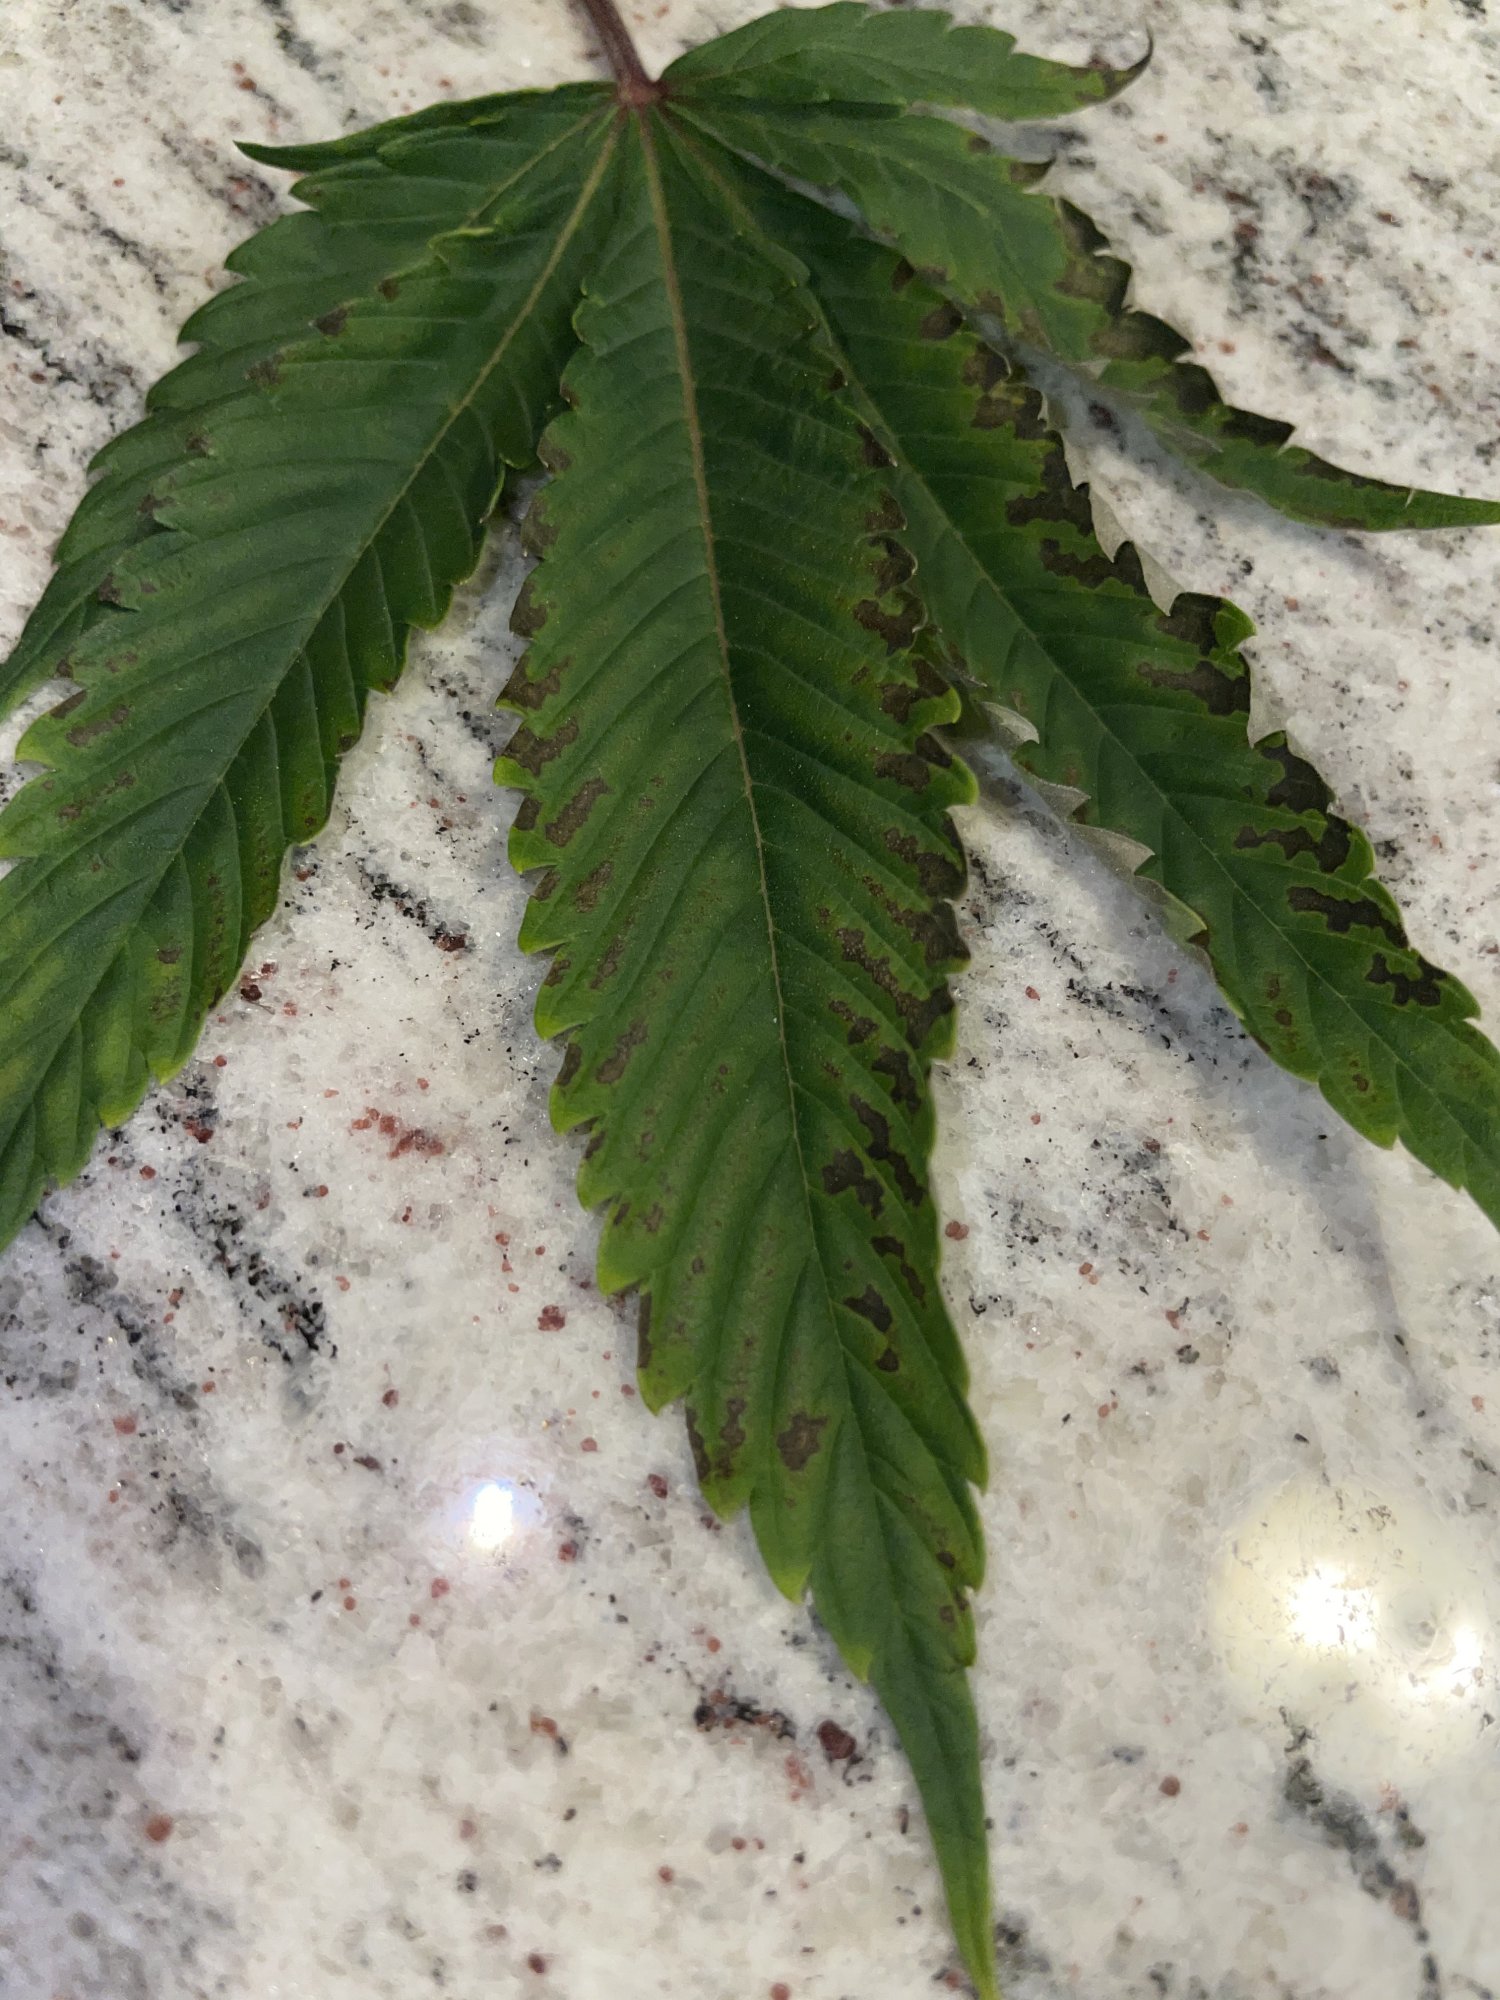 Can anyone tell me whats going on with my leaves